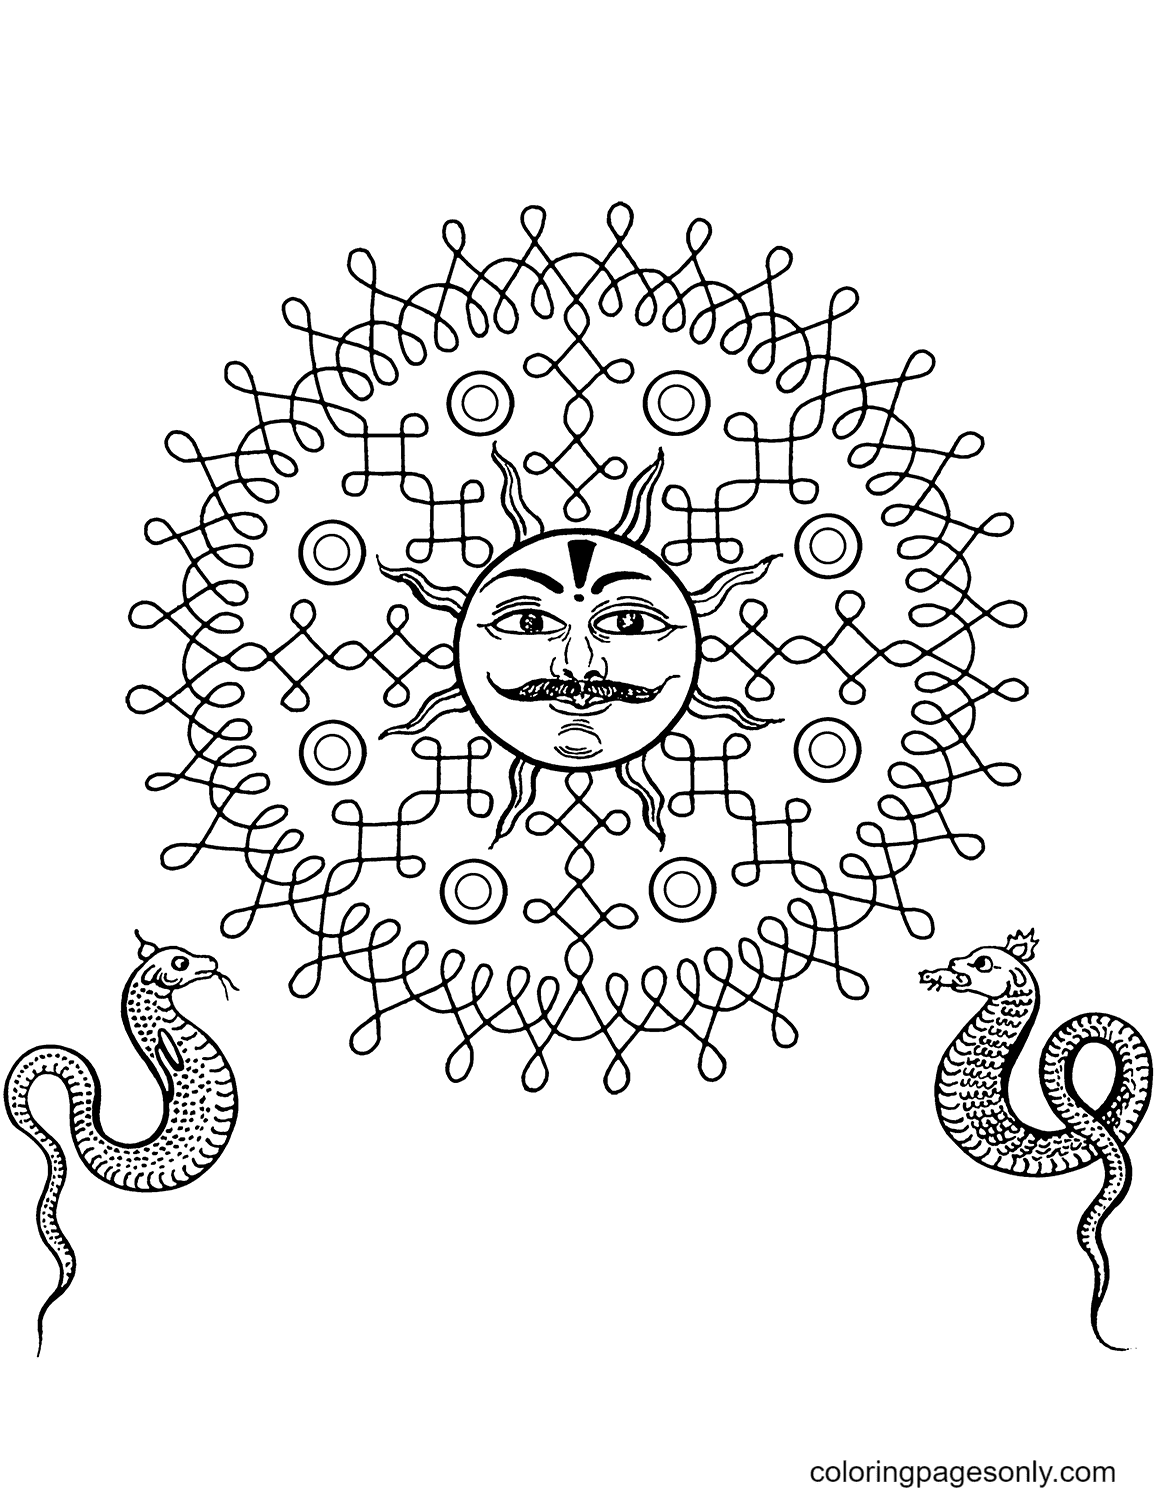 Indian Design with Sun and Snakes Coloring Page